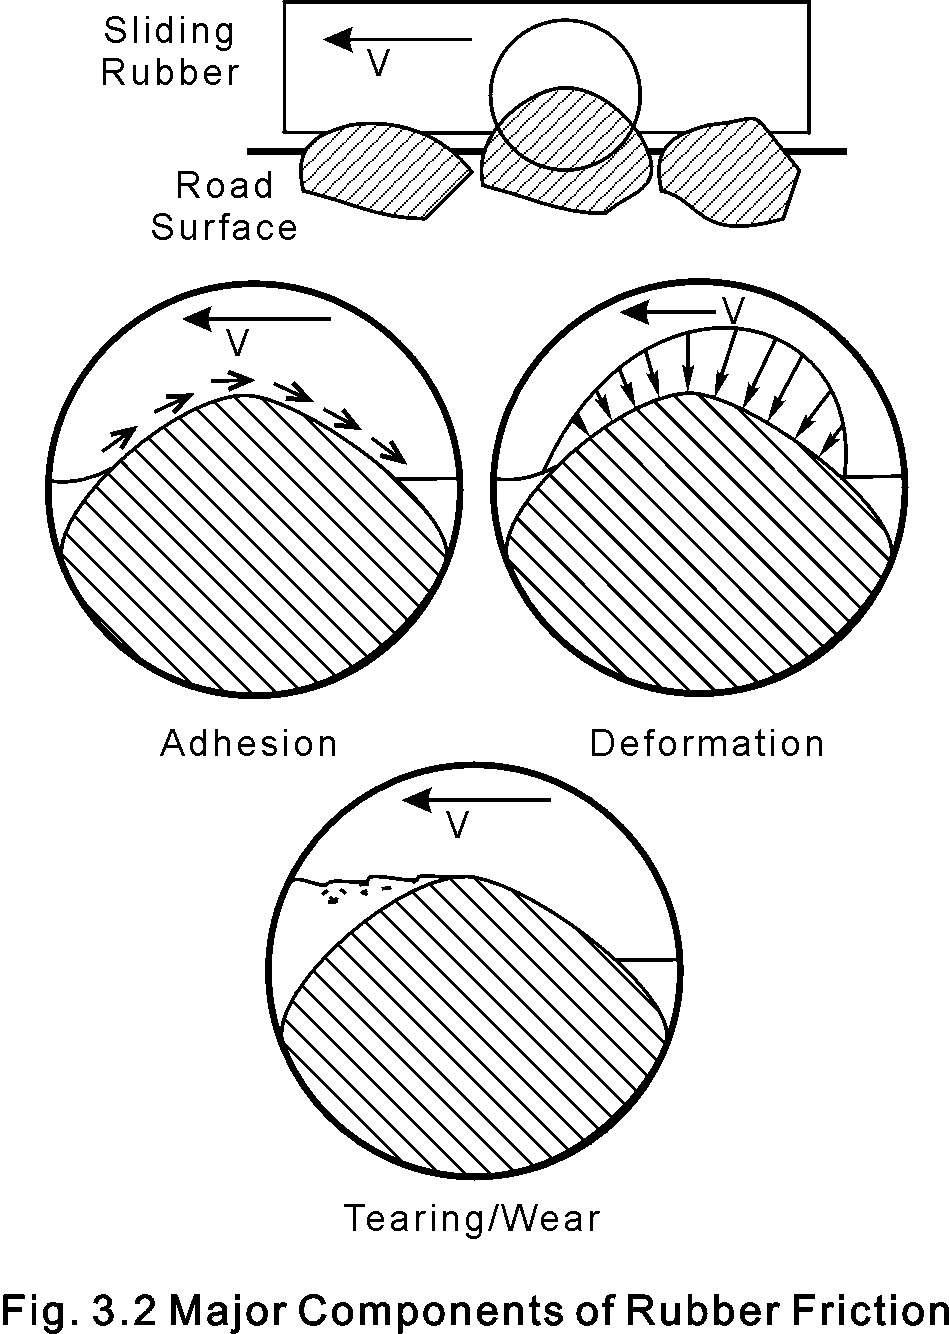 Components of Rubber Friction